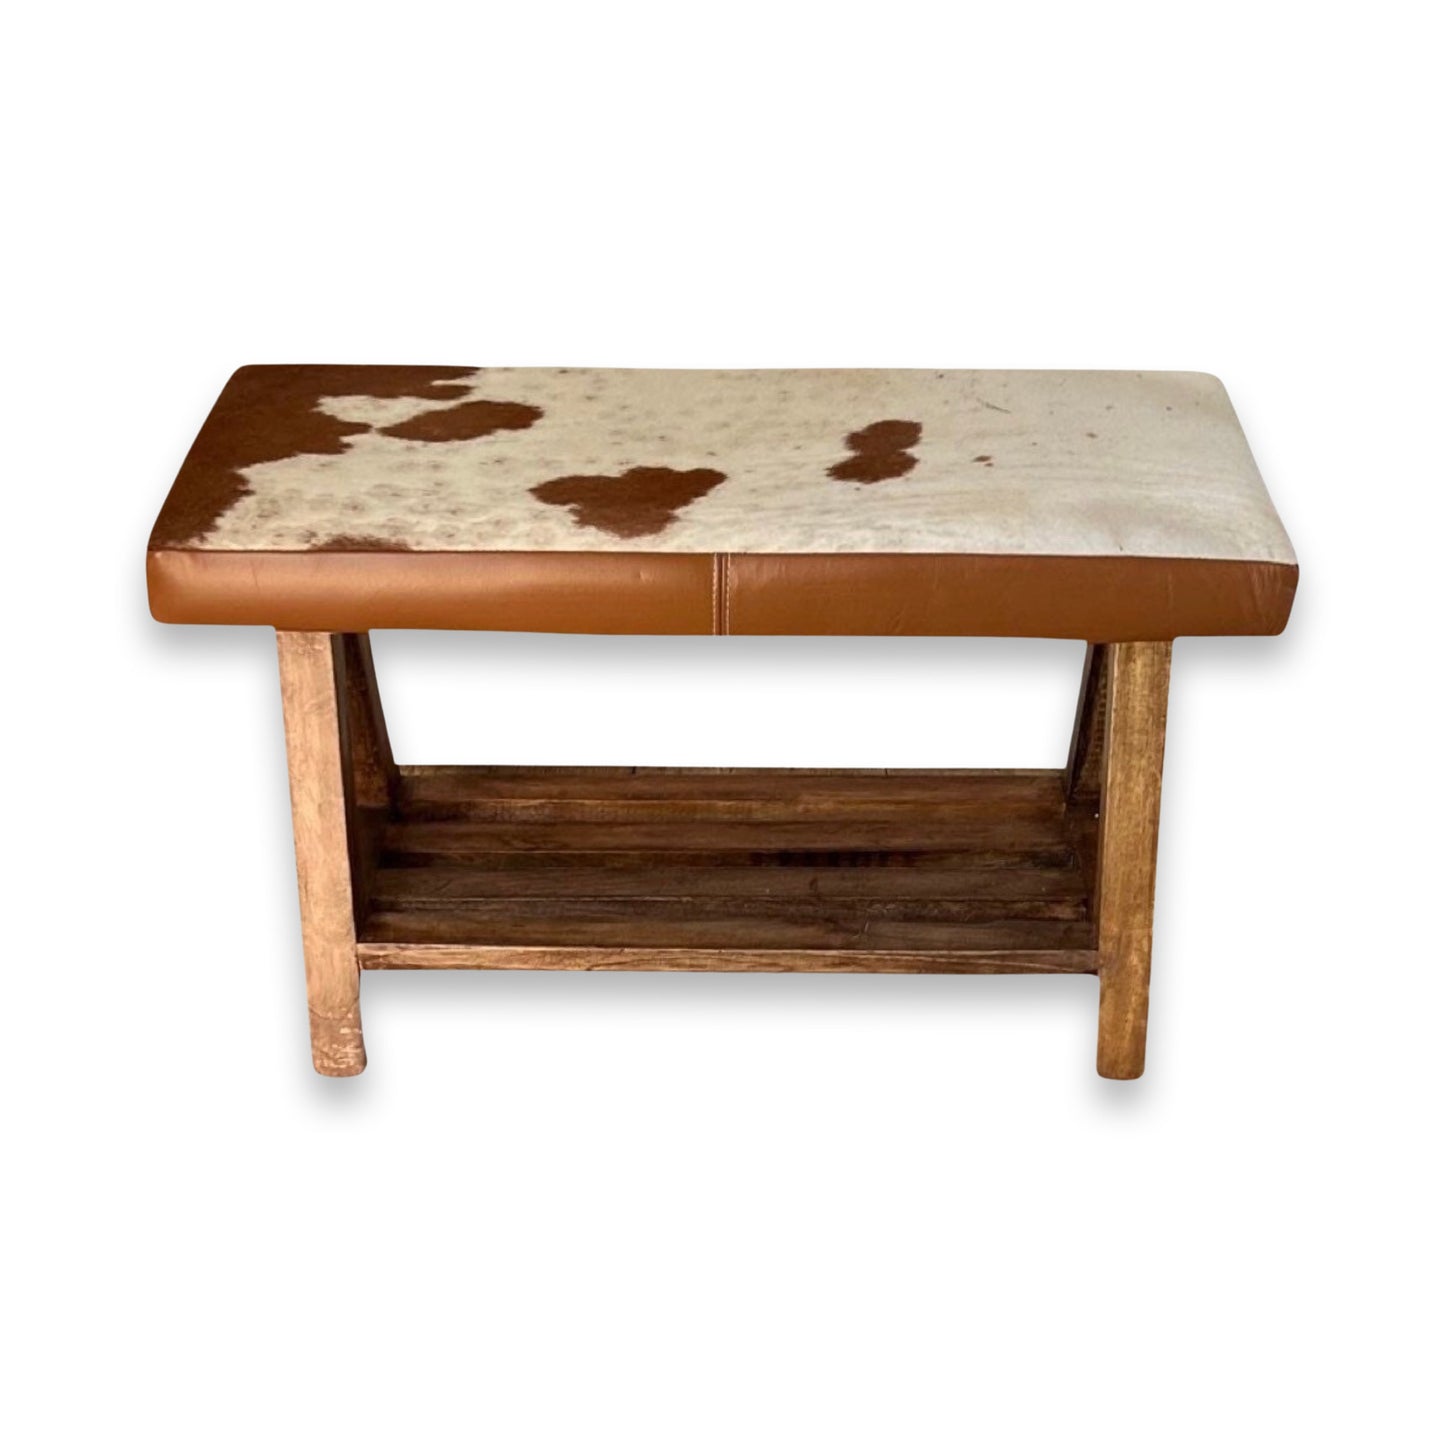 Maxlume ~ Cowhide Leather Bench Brown & White | Foot Stool | Solid Base |Shoe Rack | Floor Standing | Man Cave Stool